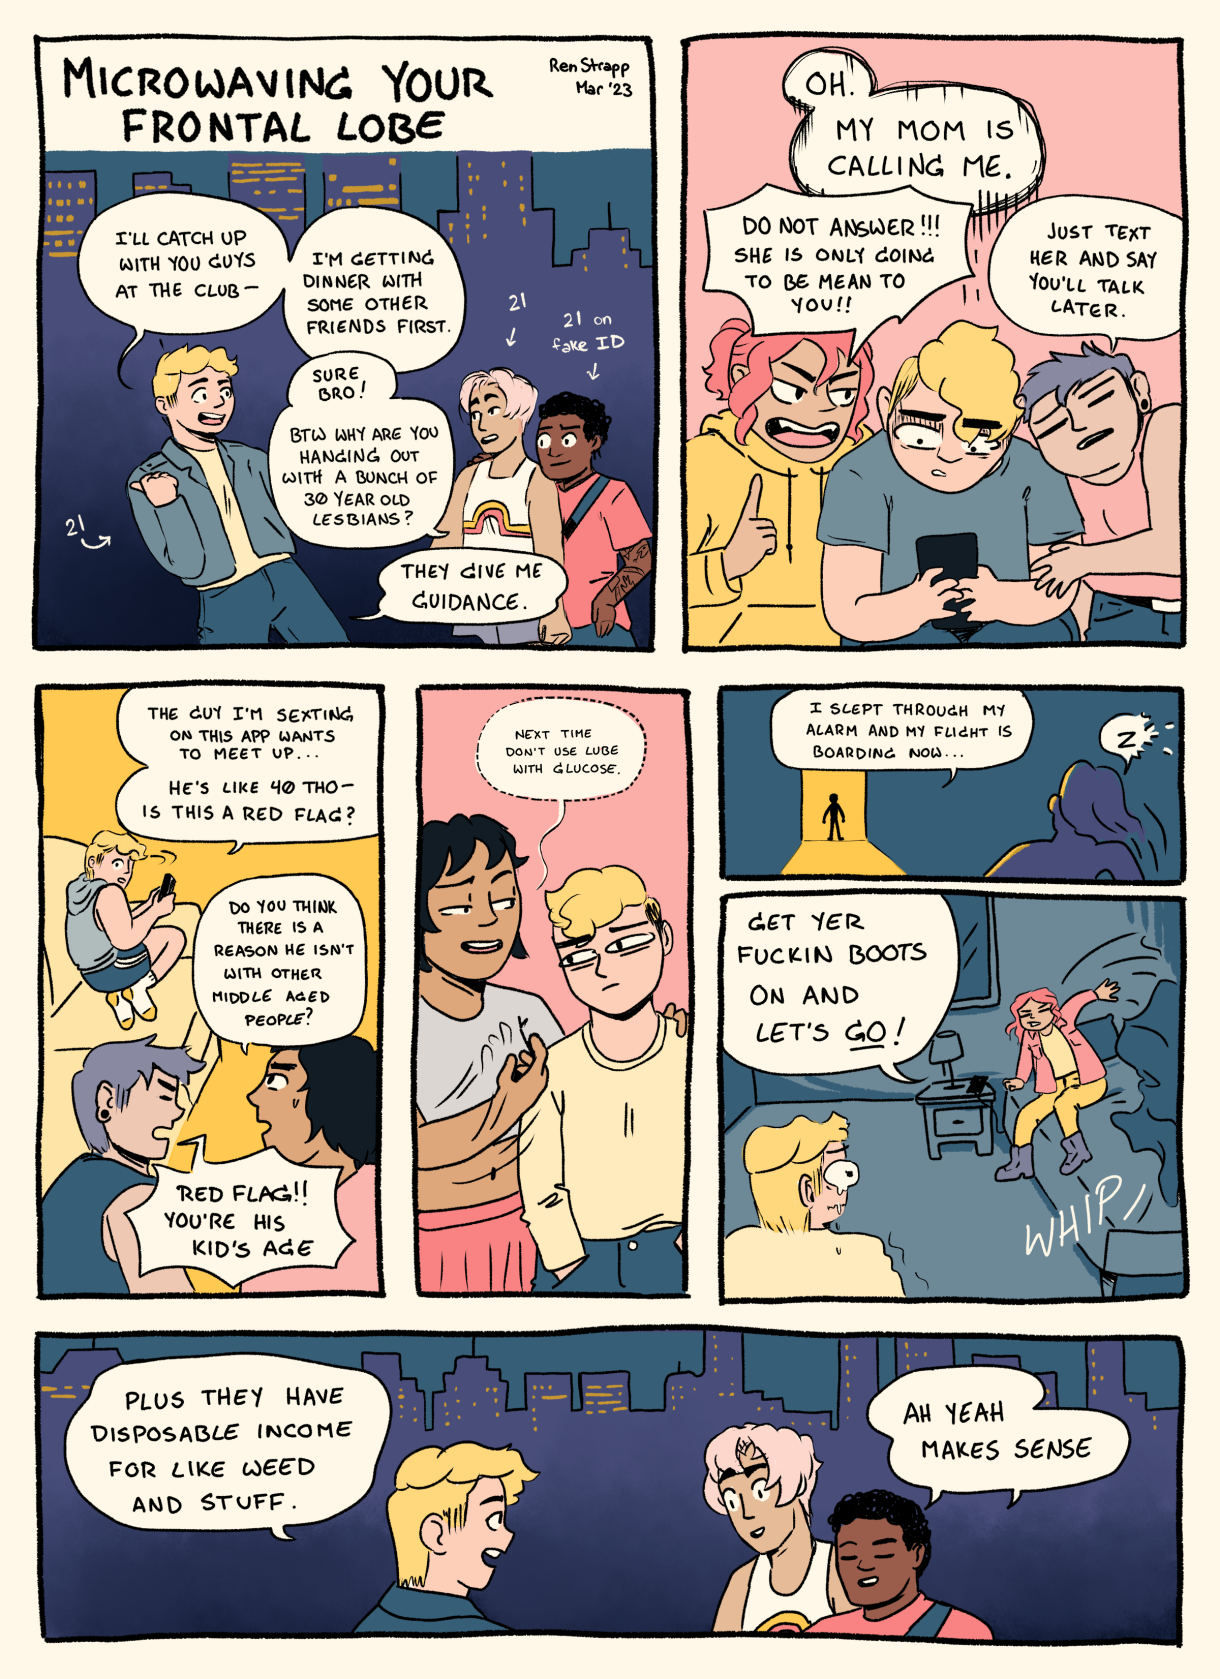 In a seven panel comic, a young queer tells their friends that they'll meet them at the club after they have dinner with some other friends. The friends say no problem, but ask why does this queer hang out with lesbians in their 30s? It's because they give great life advice. In the second panel, the same young queer is flanked by two lesbians in their 30s, teaching them how to avoid phone calls from their mother. In the second through fourth panels, the lesbians continue to advise this young queer: with help recognizing red flags on Grindr, with advice about having glucose if you're going to use lube, with a last minute ride to the airport when it sees all is lost. In the last panel, the young queer says to their friends: Plus they have disposable income for like, weed and stuff."